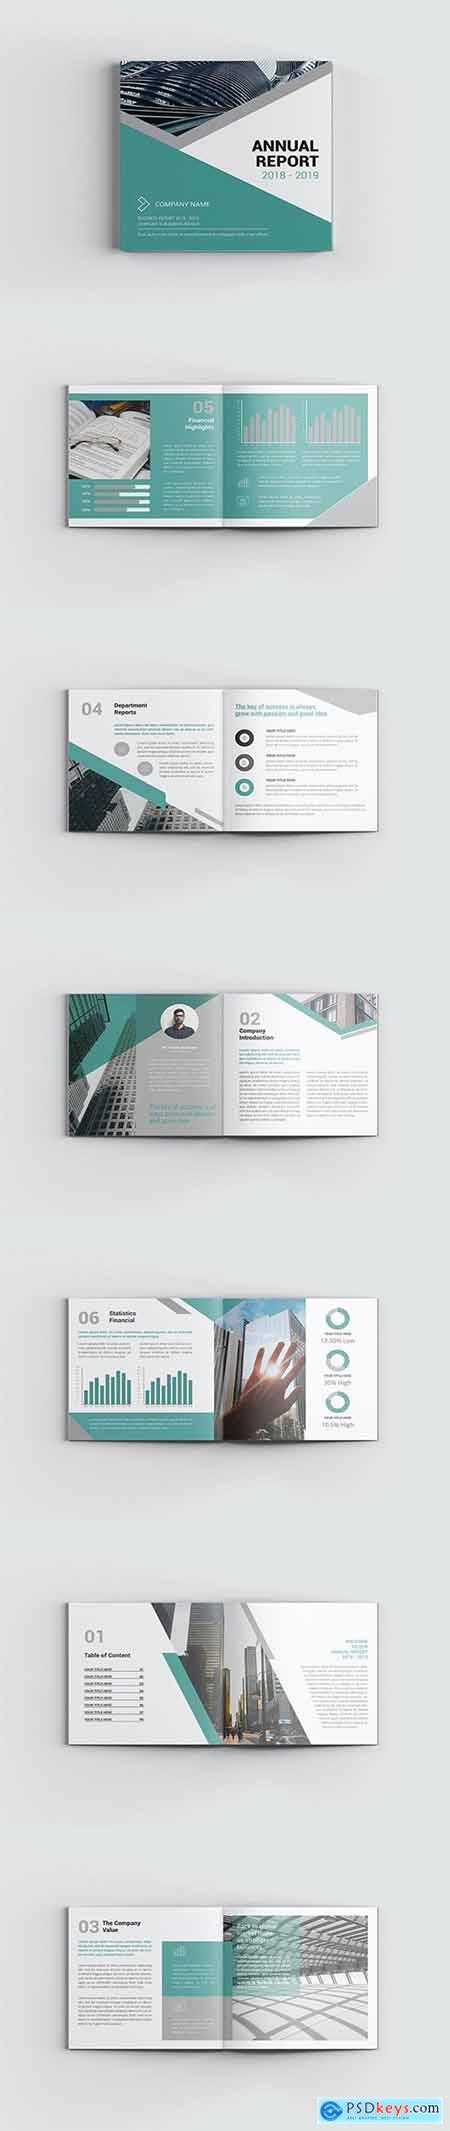 Contacts Square Annual Report